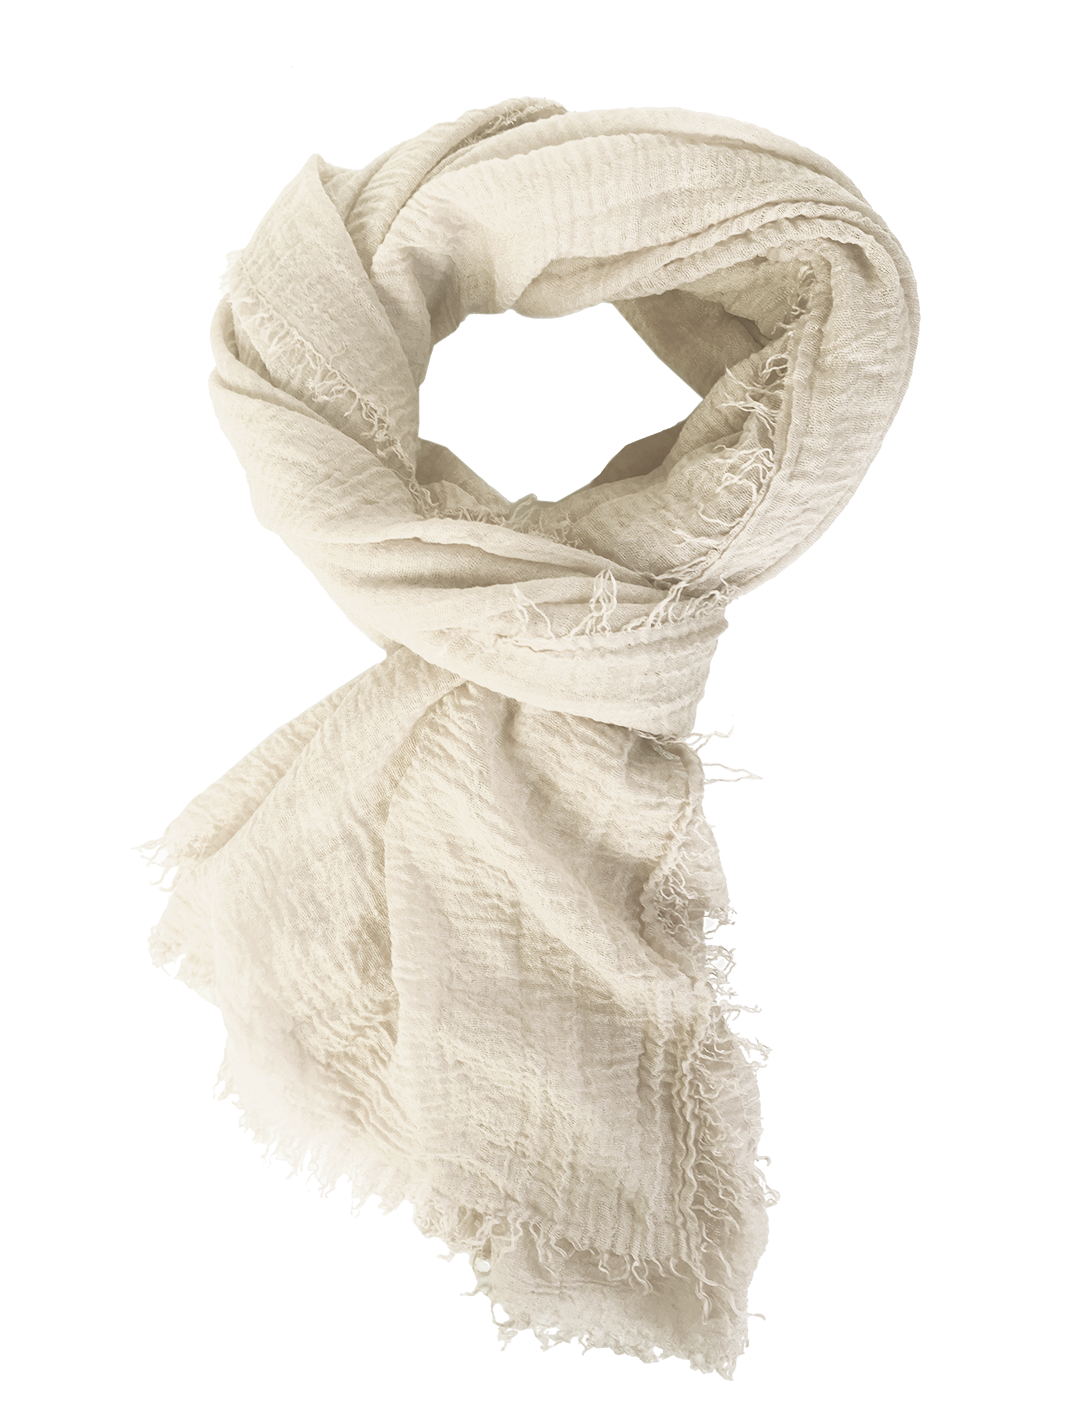 Boho Scarf - Cream - Kingfisher Road - Online Boutique